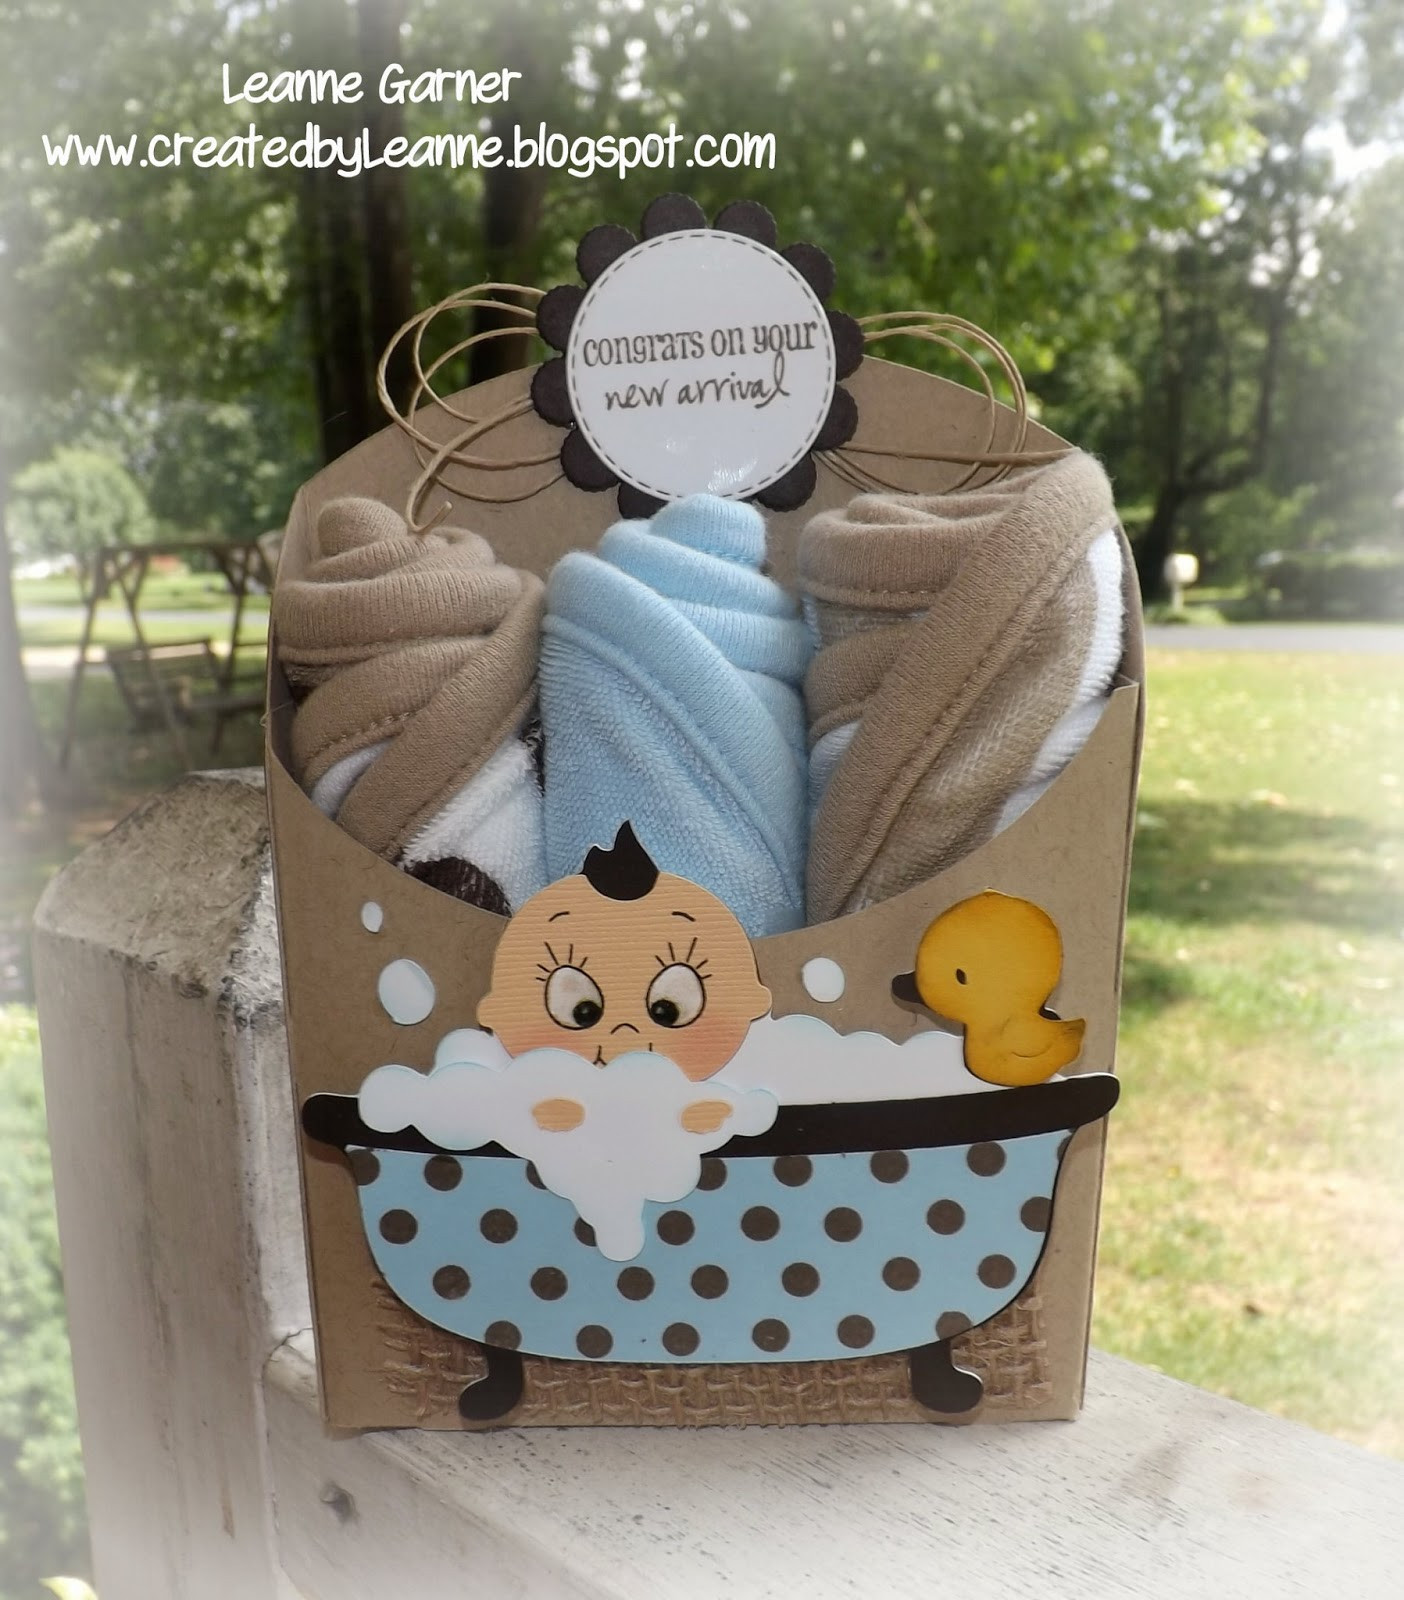 Cute Baby Shower Gift
 Obsessed with Scrapbooking See the Cutest Baby Shower